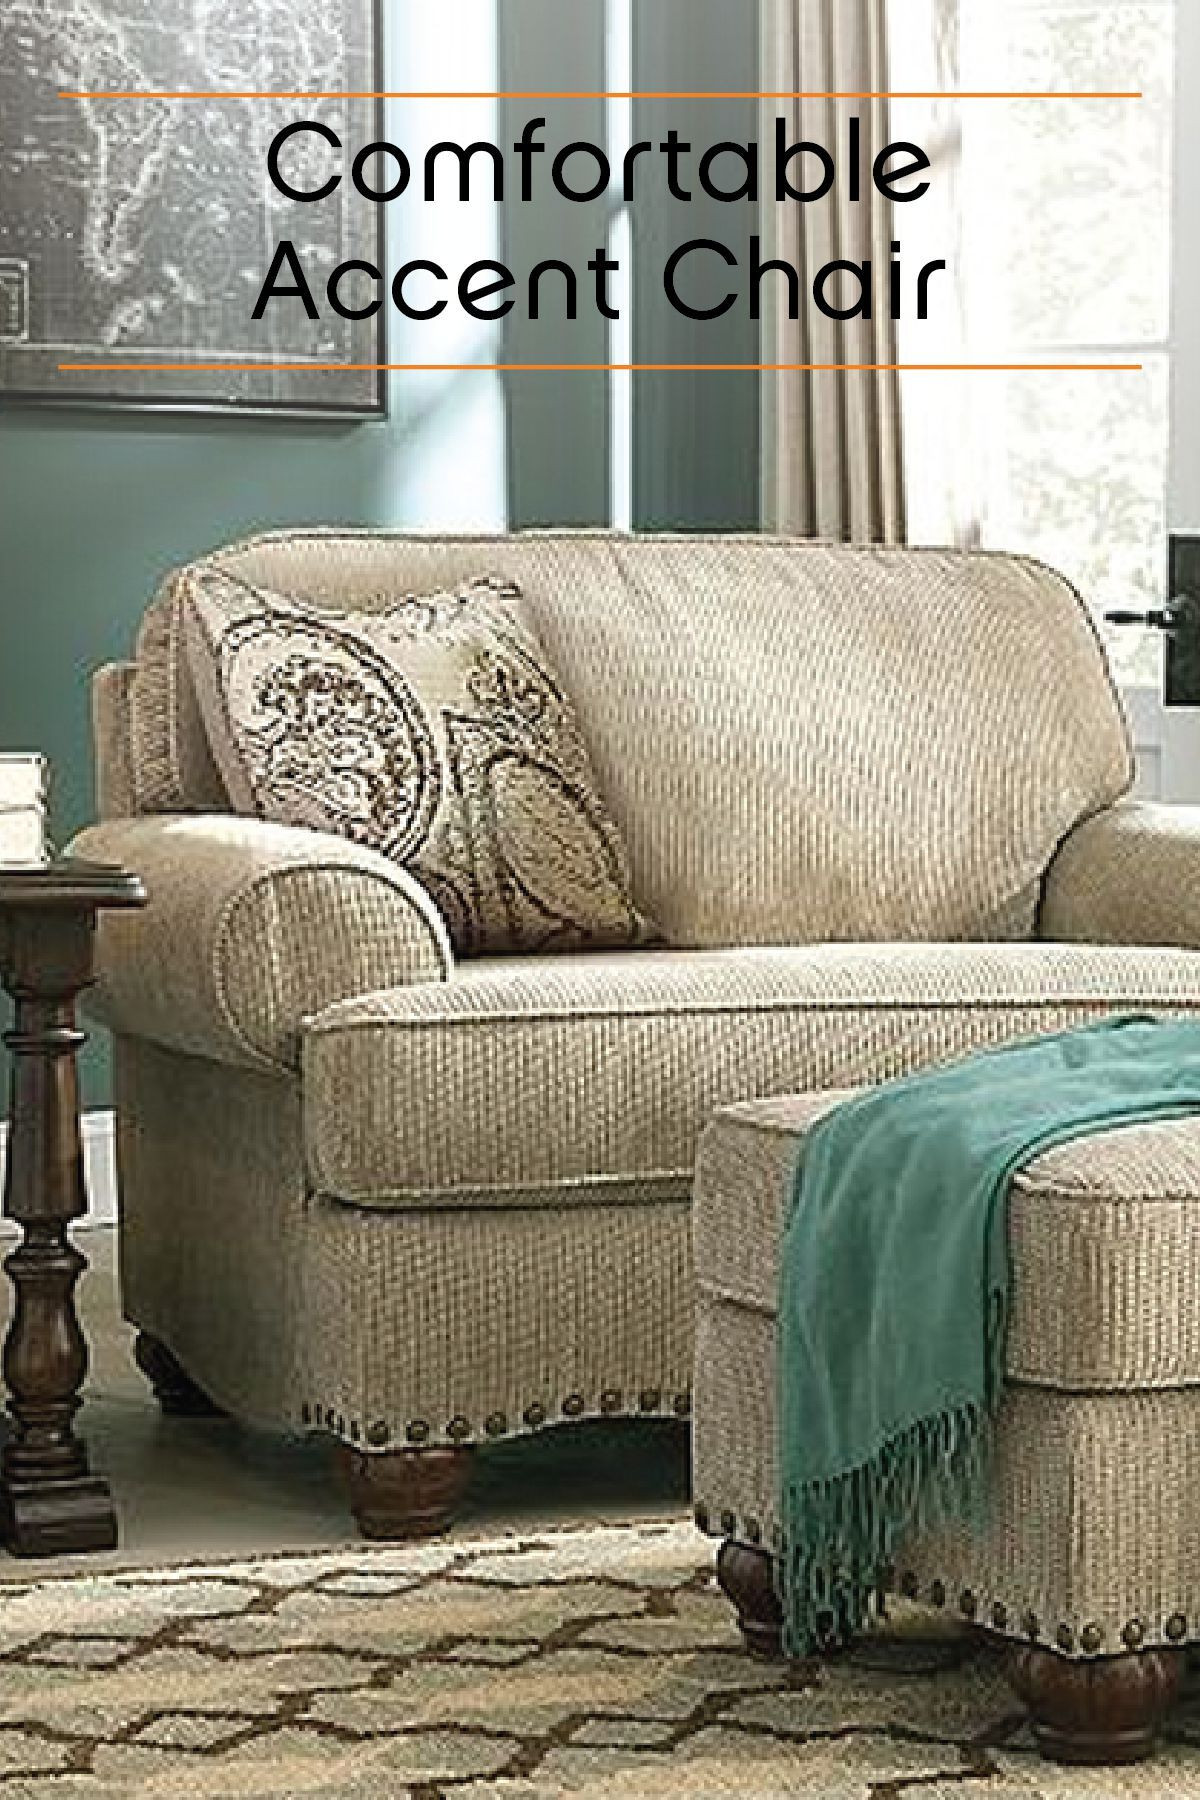 Oversized Living Room Chair
 This oversized accent chair is a roomy and stylish way to